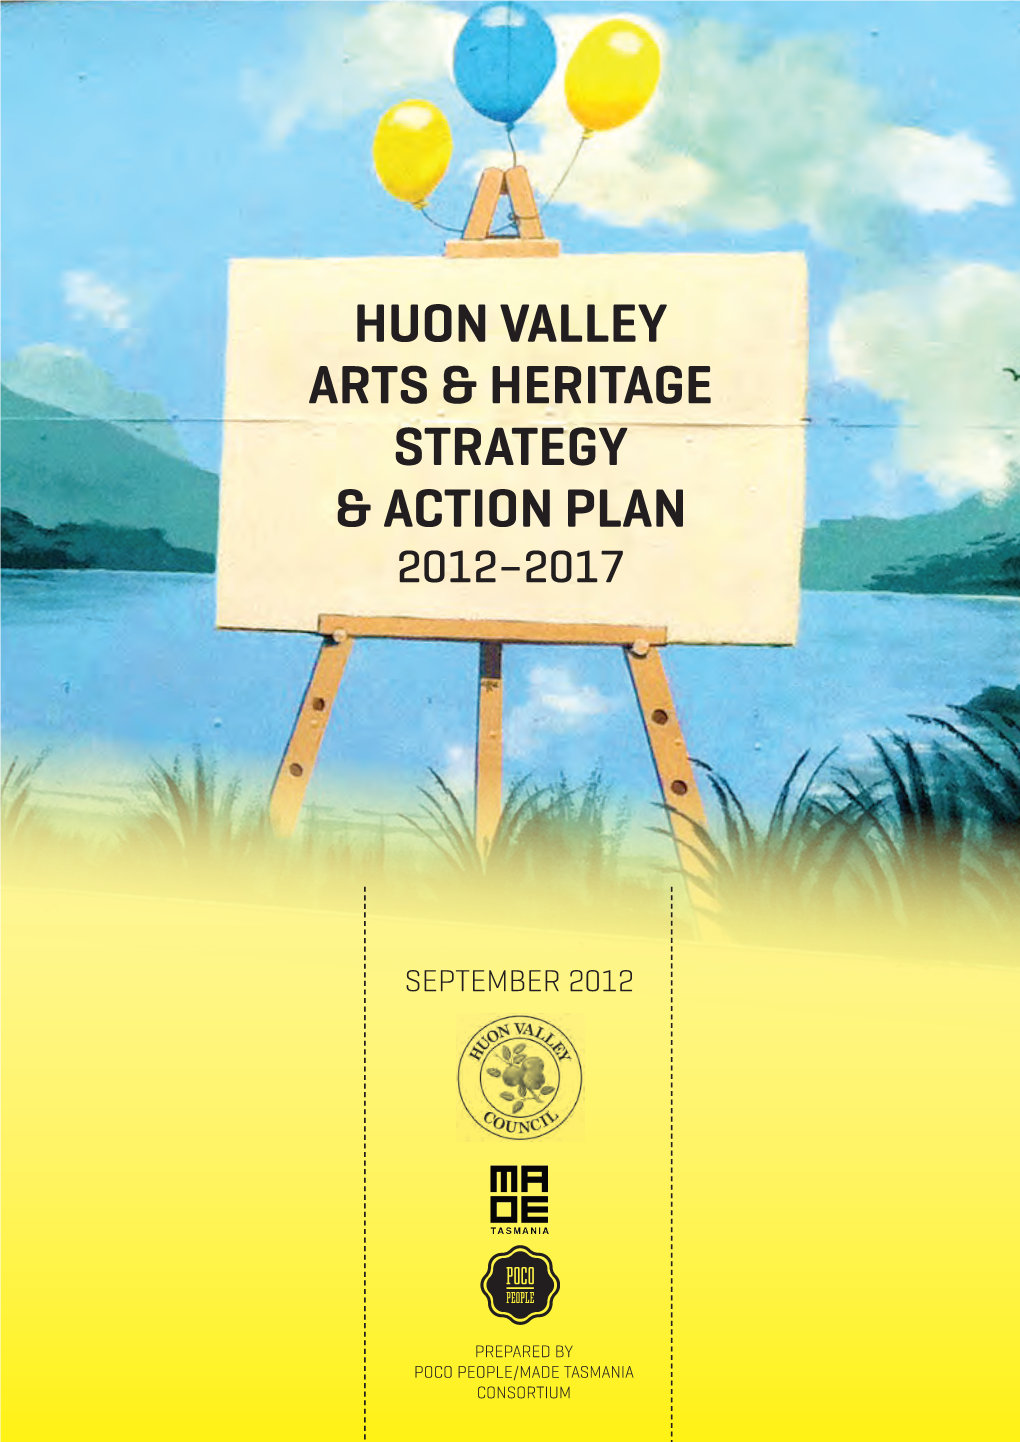 Huon Valley Arts & Heritage Strategy & Action Plan